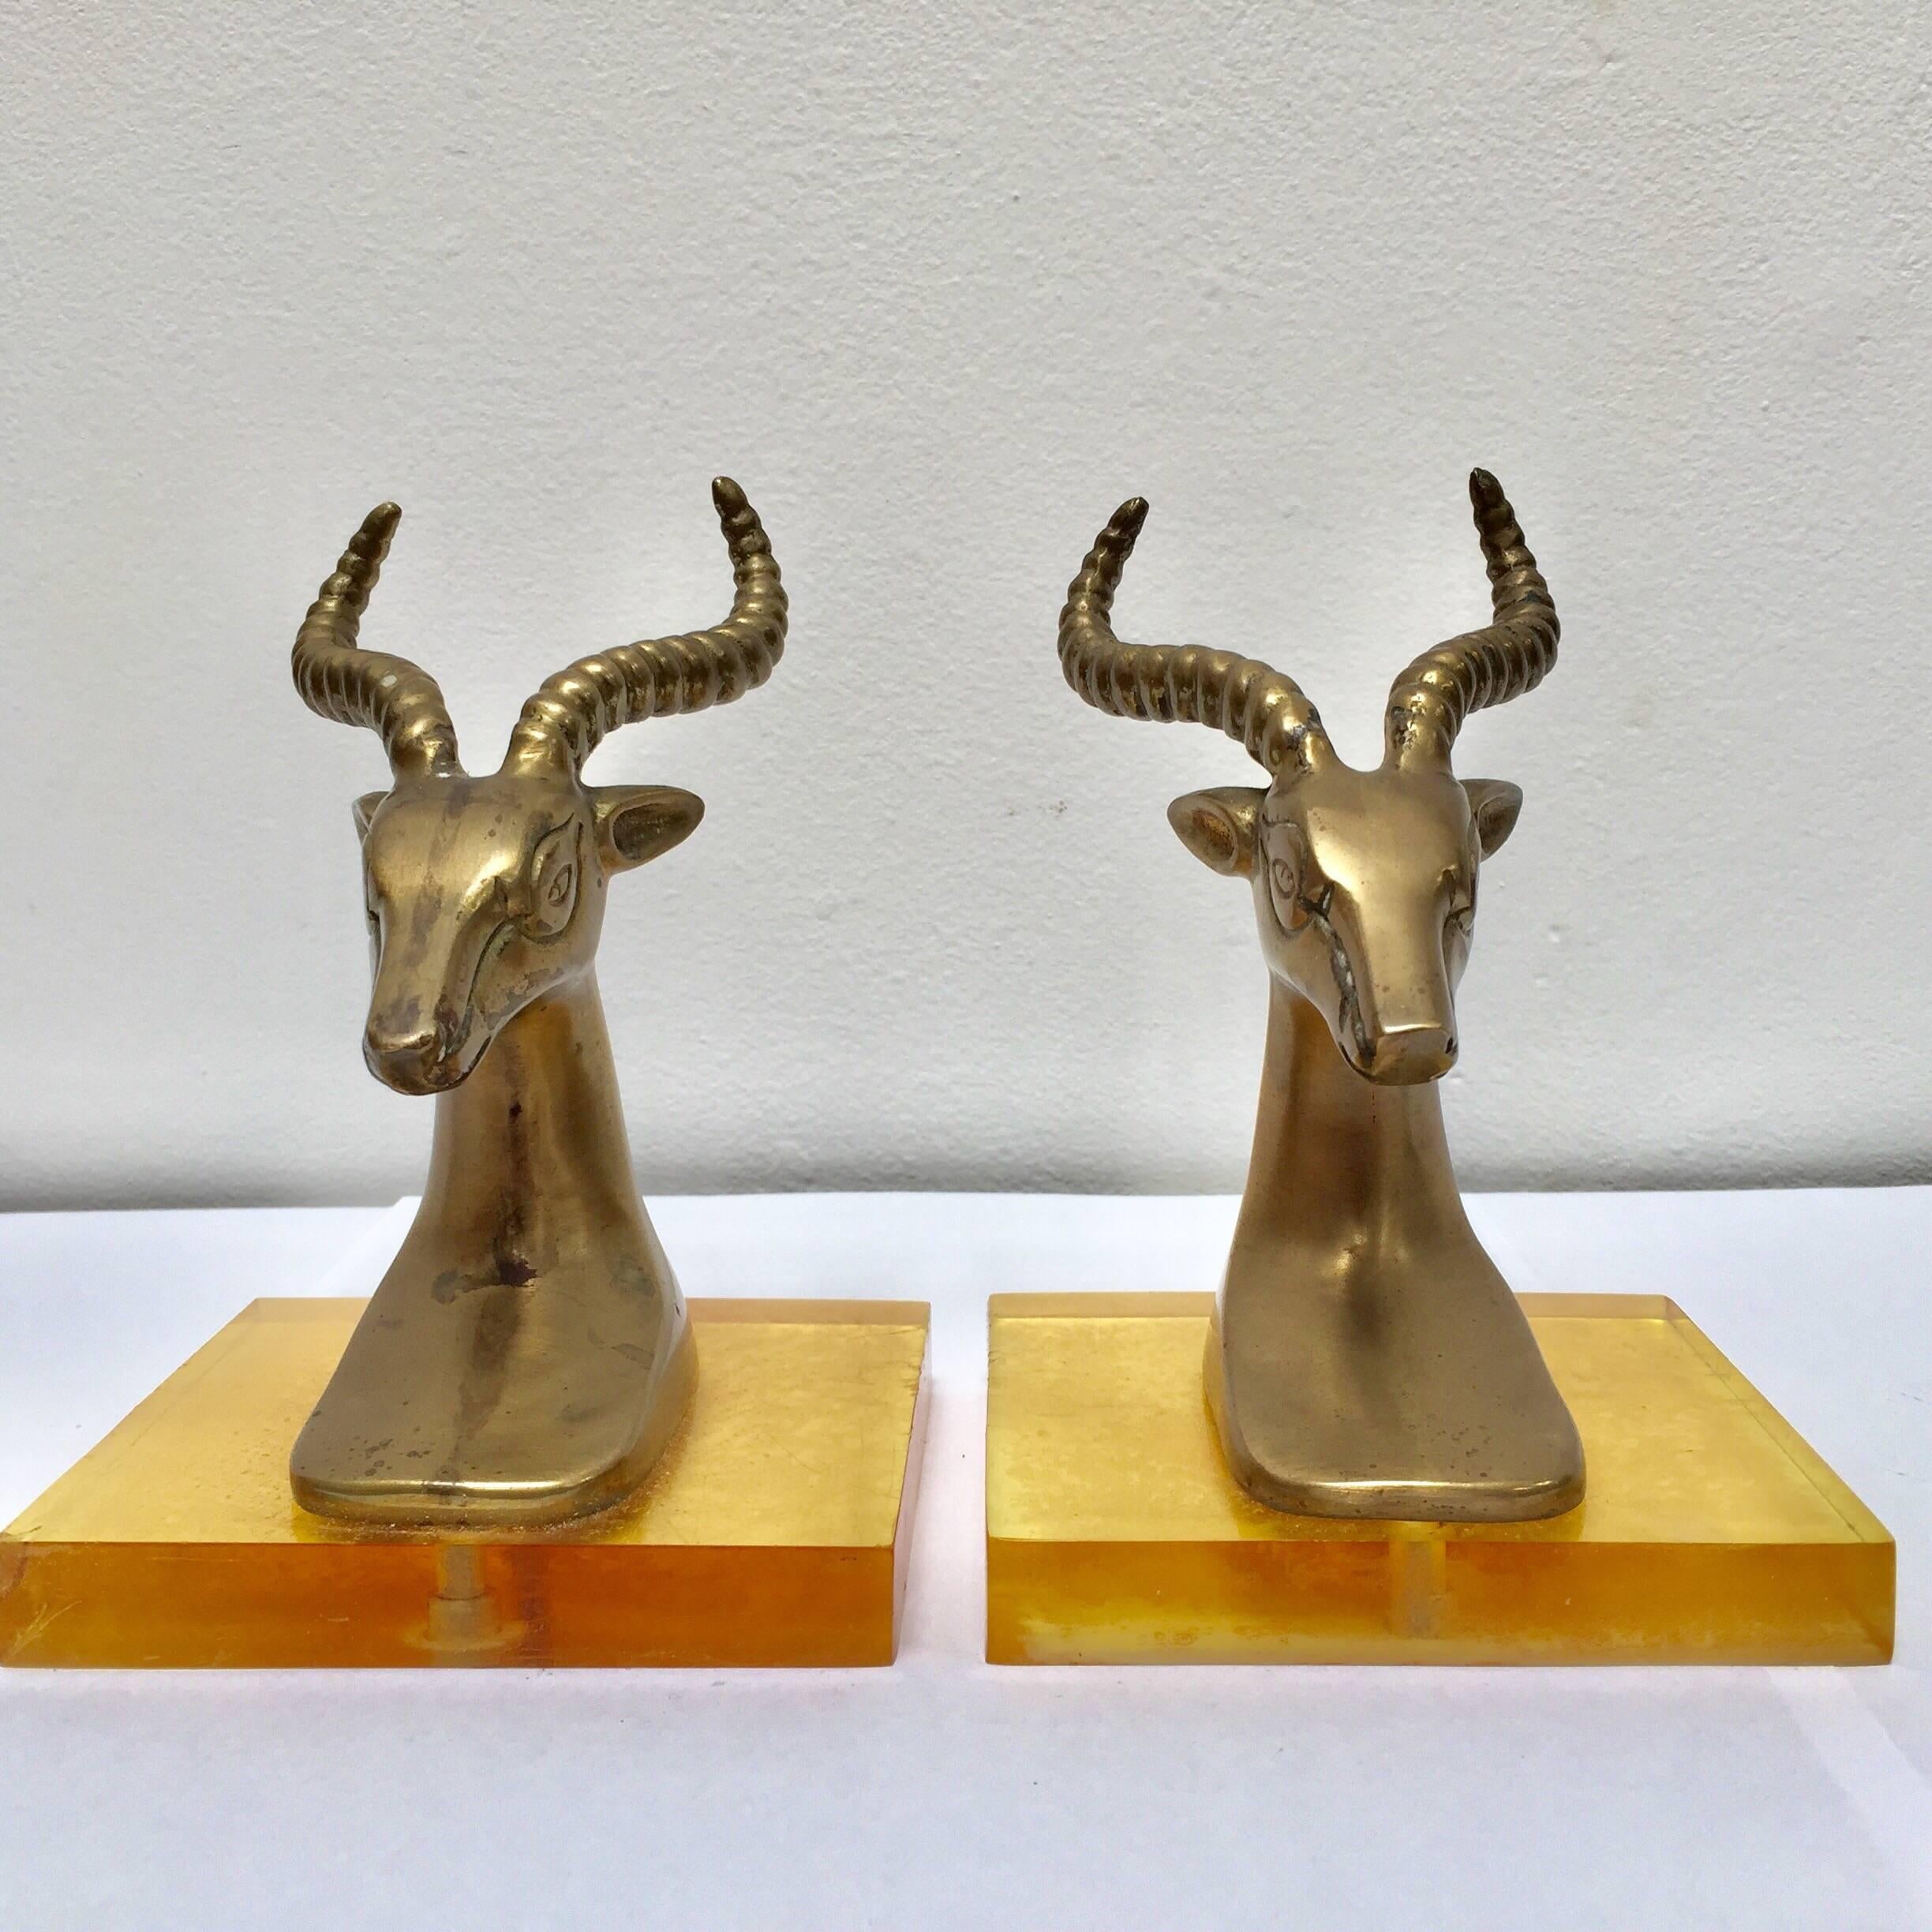 Set of vintage brass antelope on Lucite stand bookends.
Size for each: 5.5